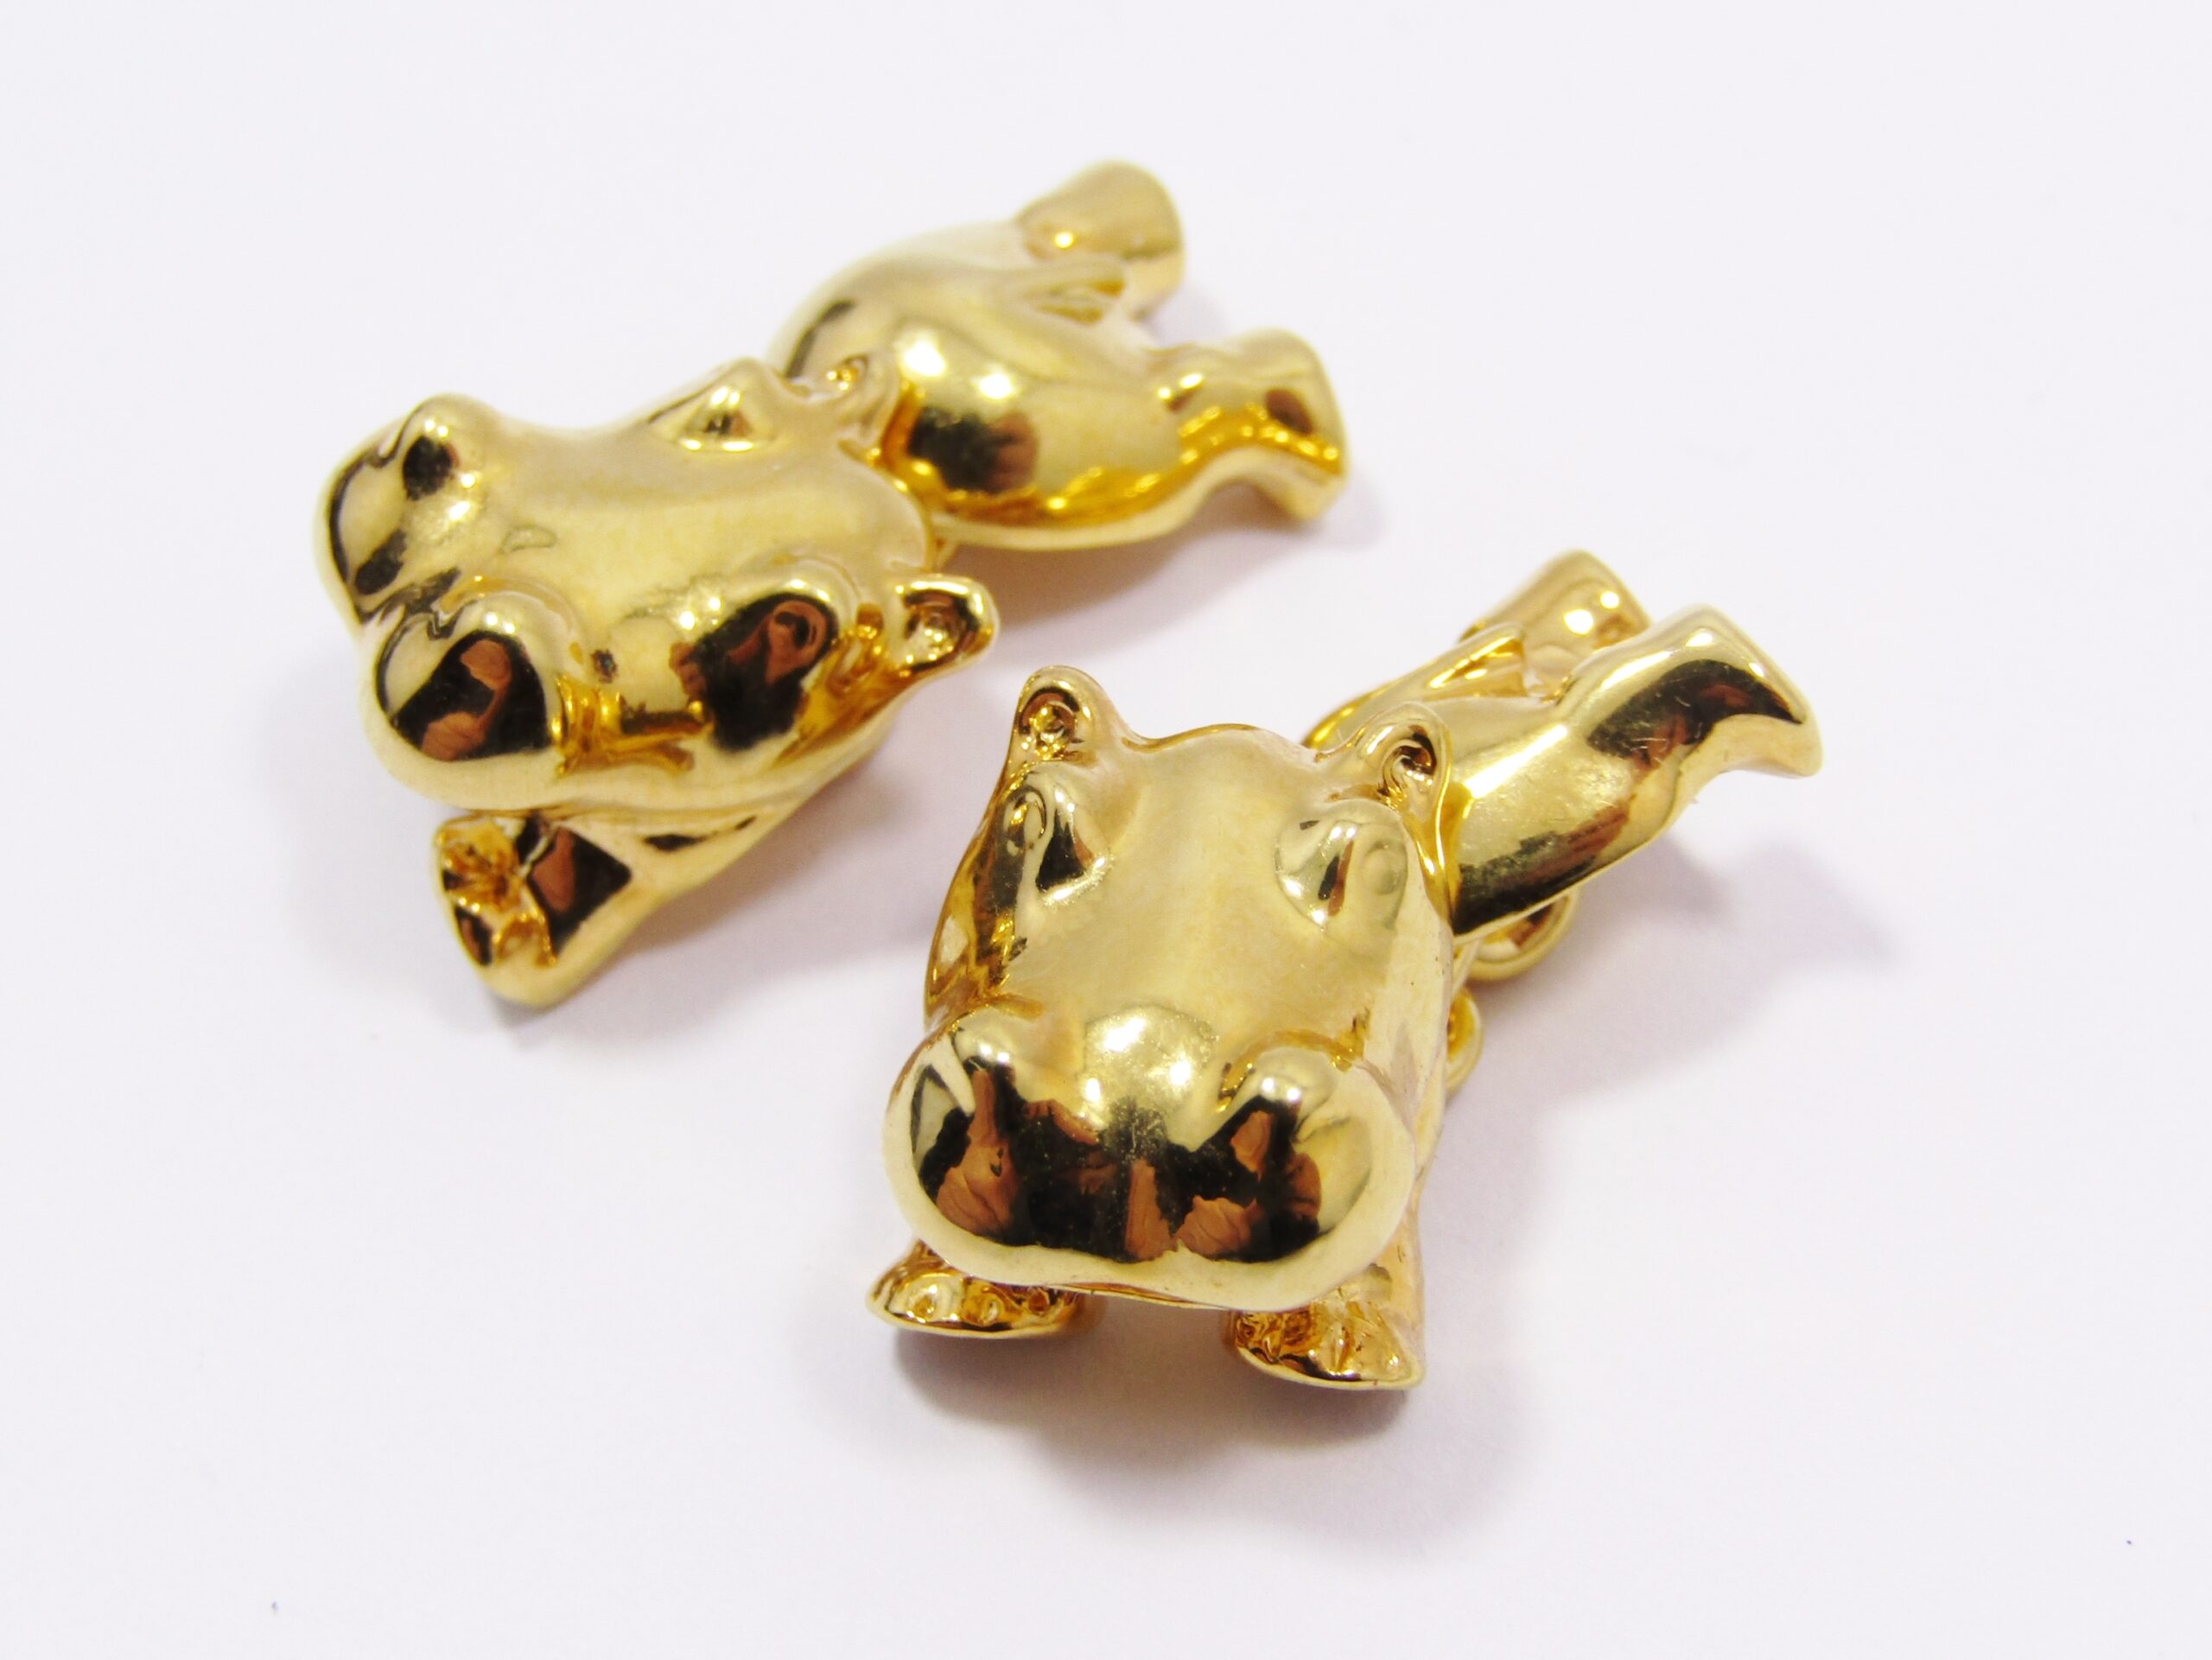 A Gorgeous Pair of Rolled Gold Hippopotamus Cuff Links